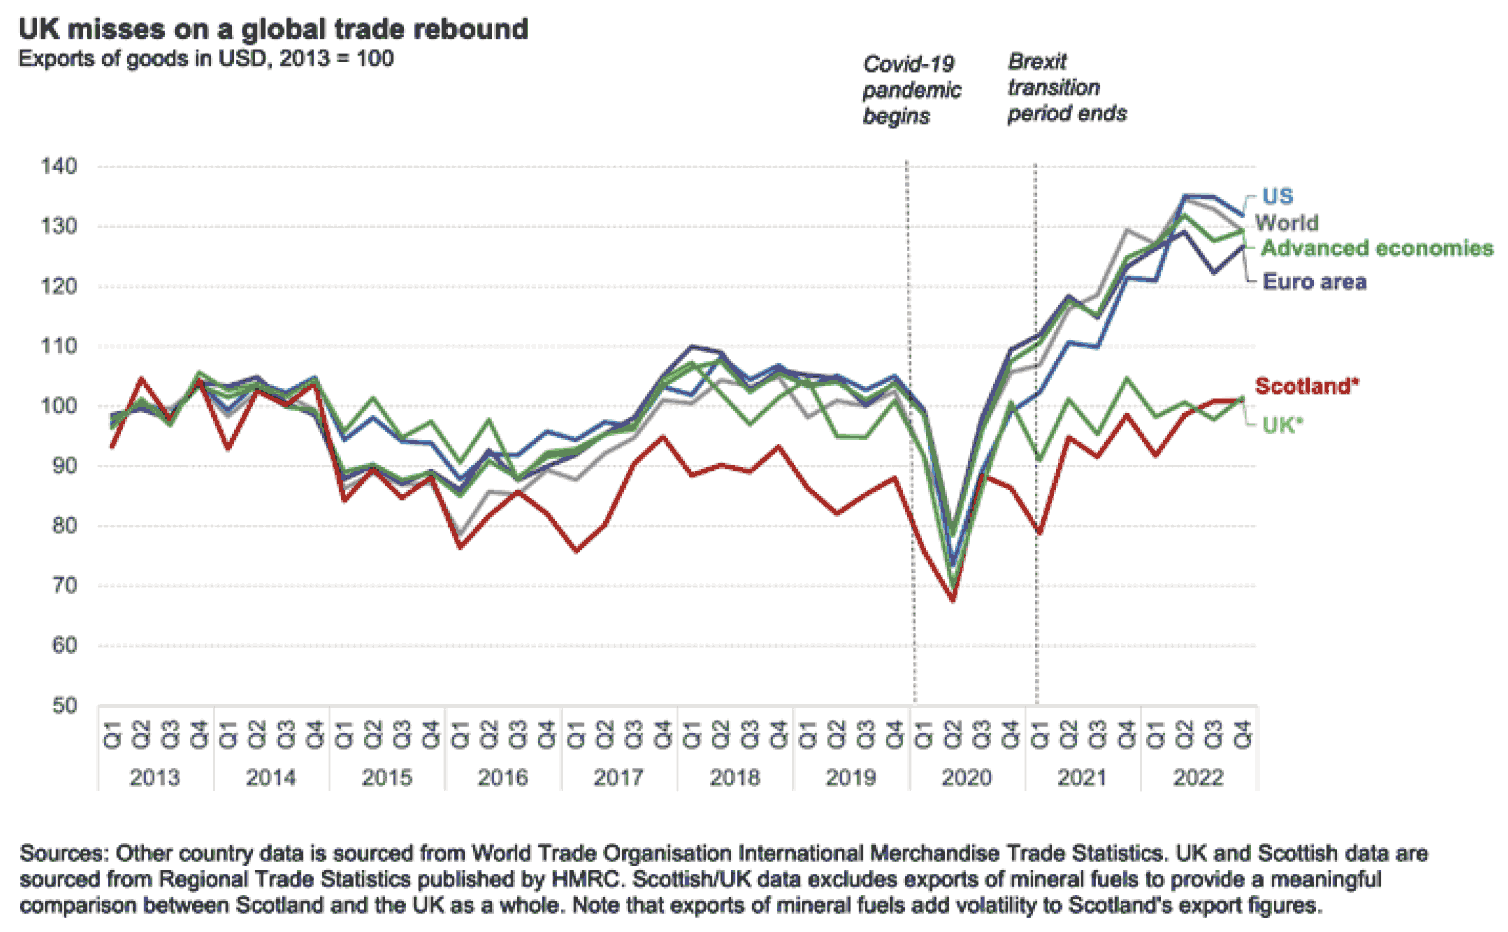 Figure 1 shows Scotland’s recent export performance over time compared to the rest of UK and other economie